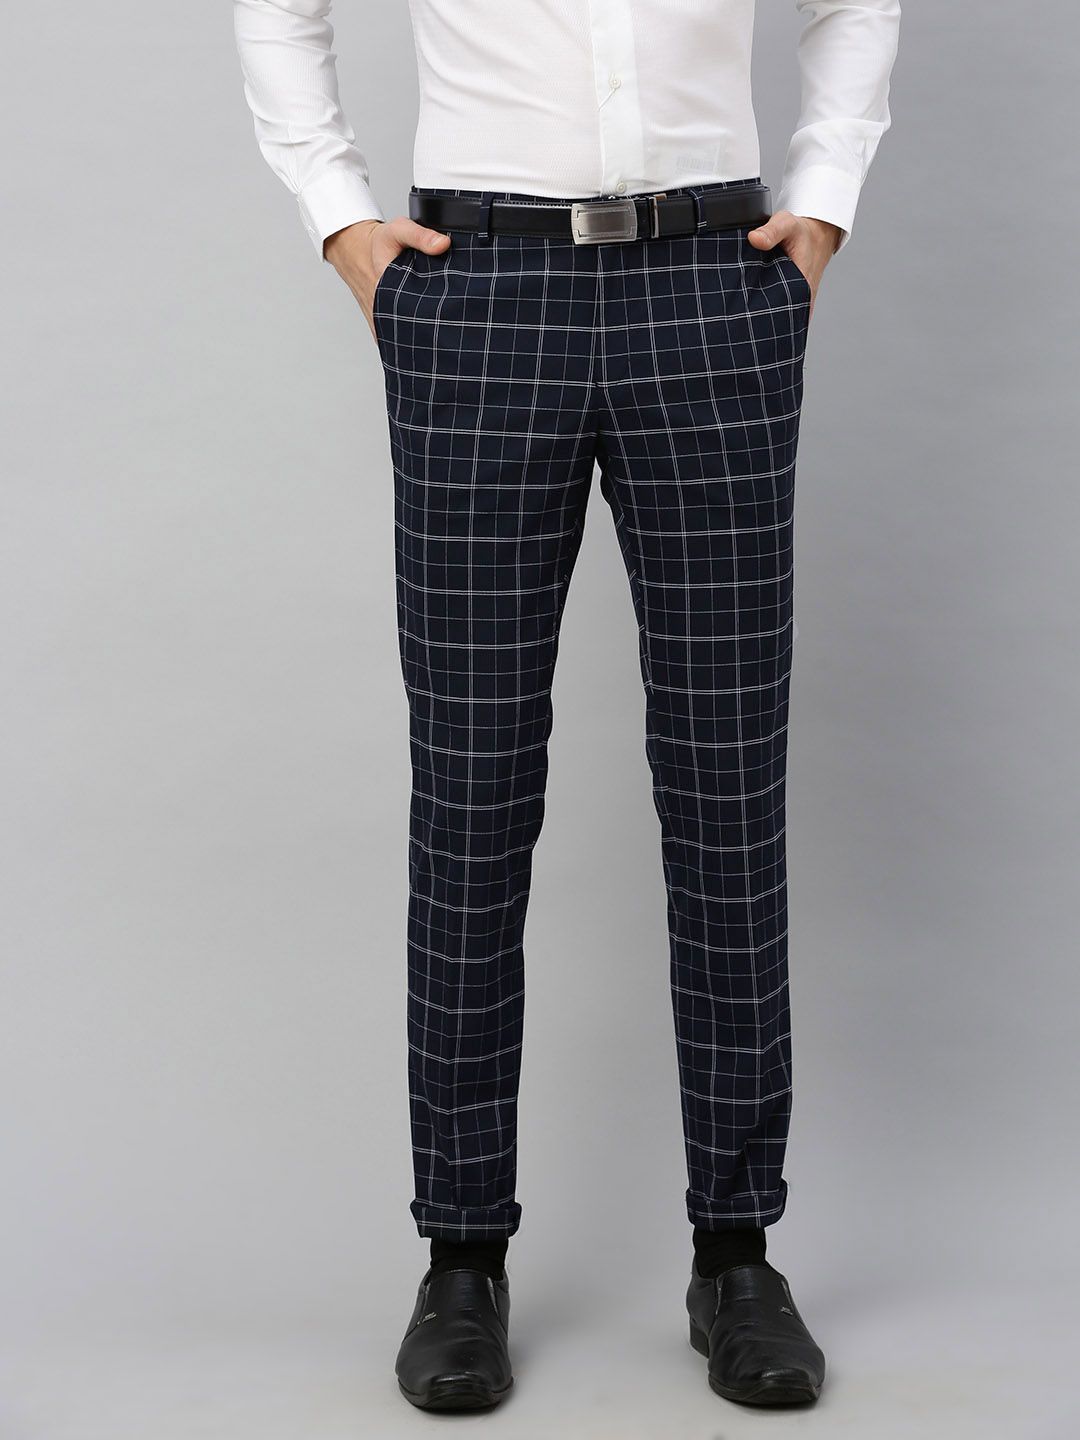 7 Formal Trousers for Men: Ideal for Workplaces and Dates!